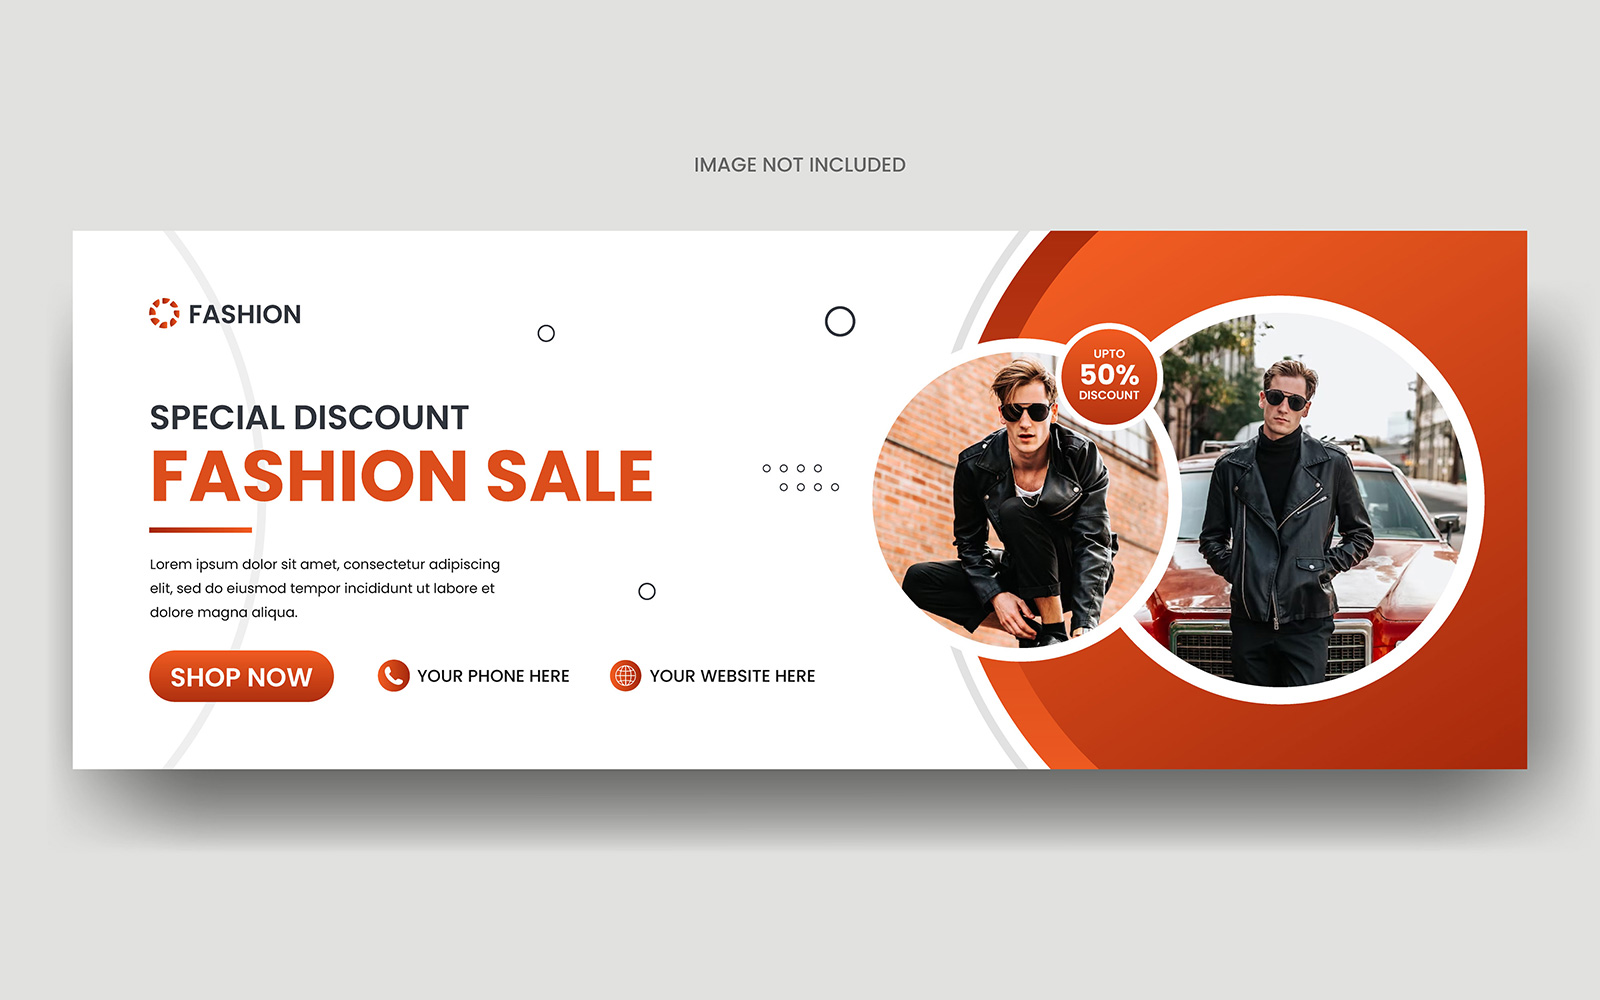 Fashion sale social media facebook cover design and web banner template